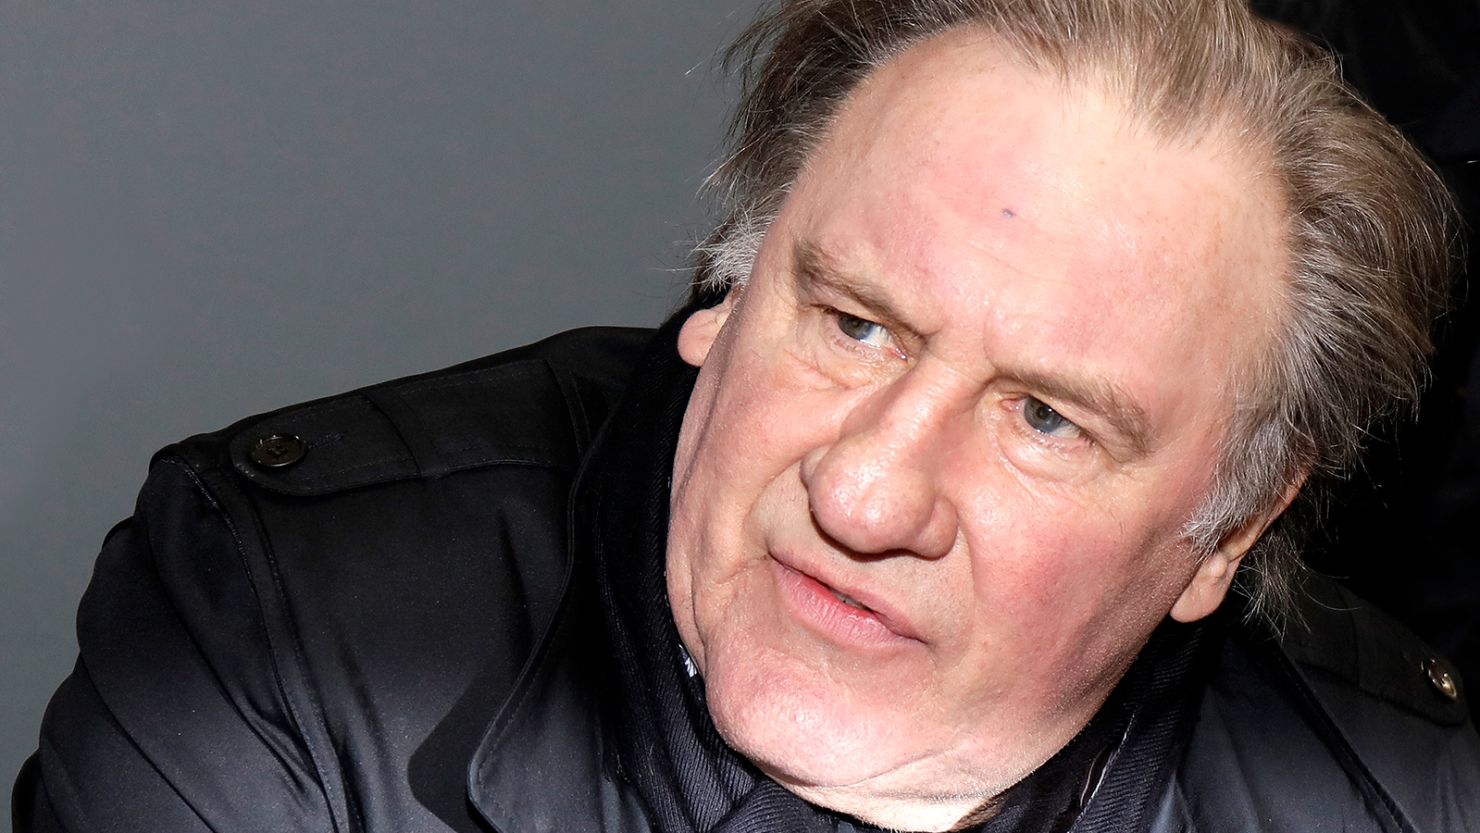 Gerard Depardieu's eminent status in France has only amplified the controversy over accusations of sexual offenses by no fewer than 20 women, Caroline Séquin writes.